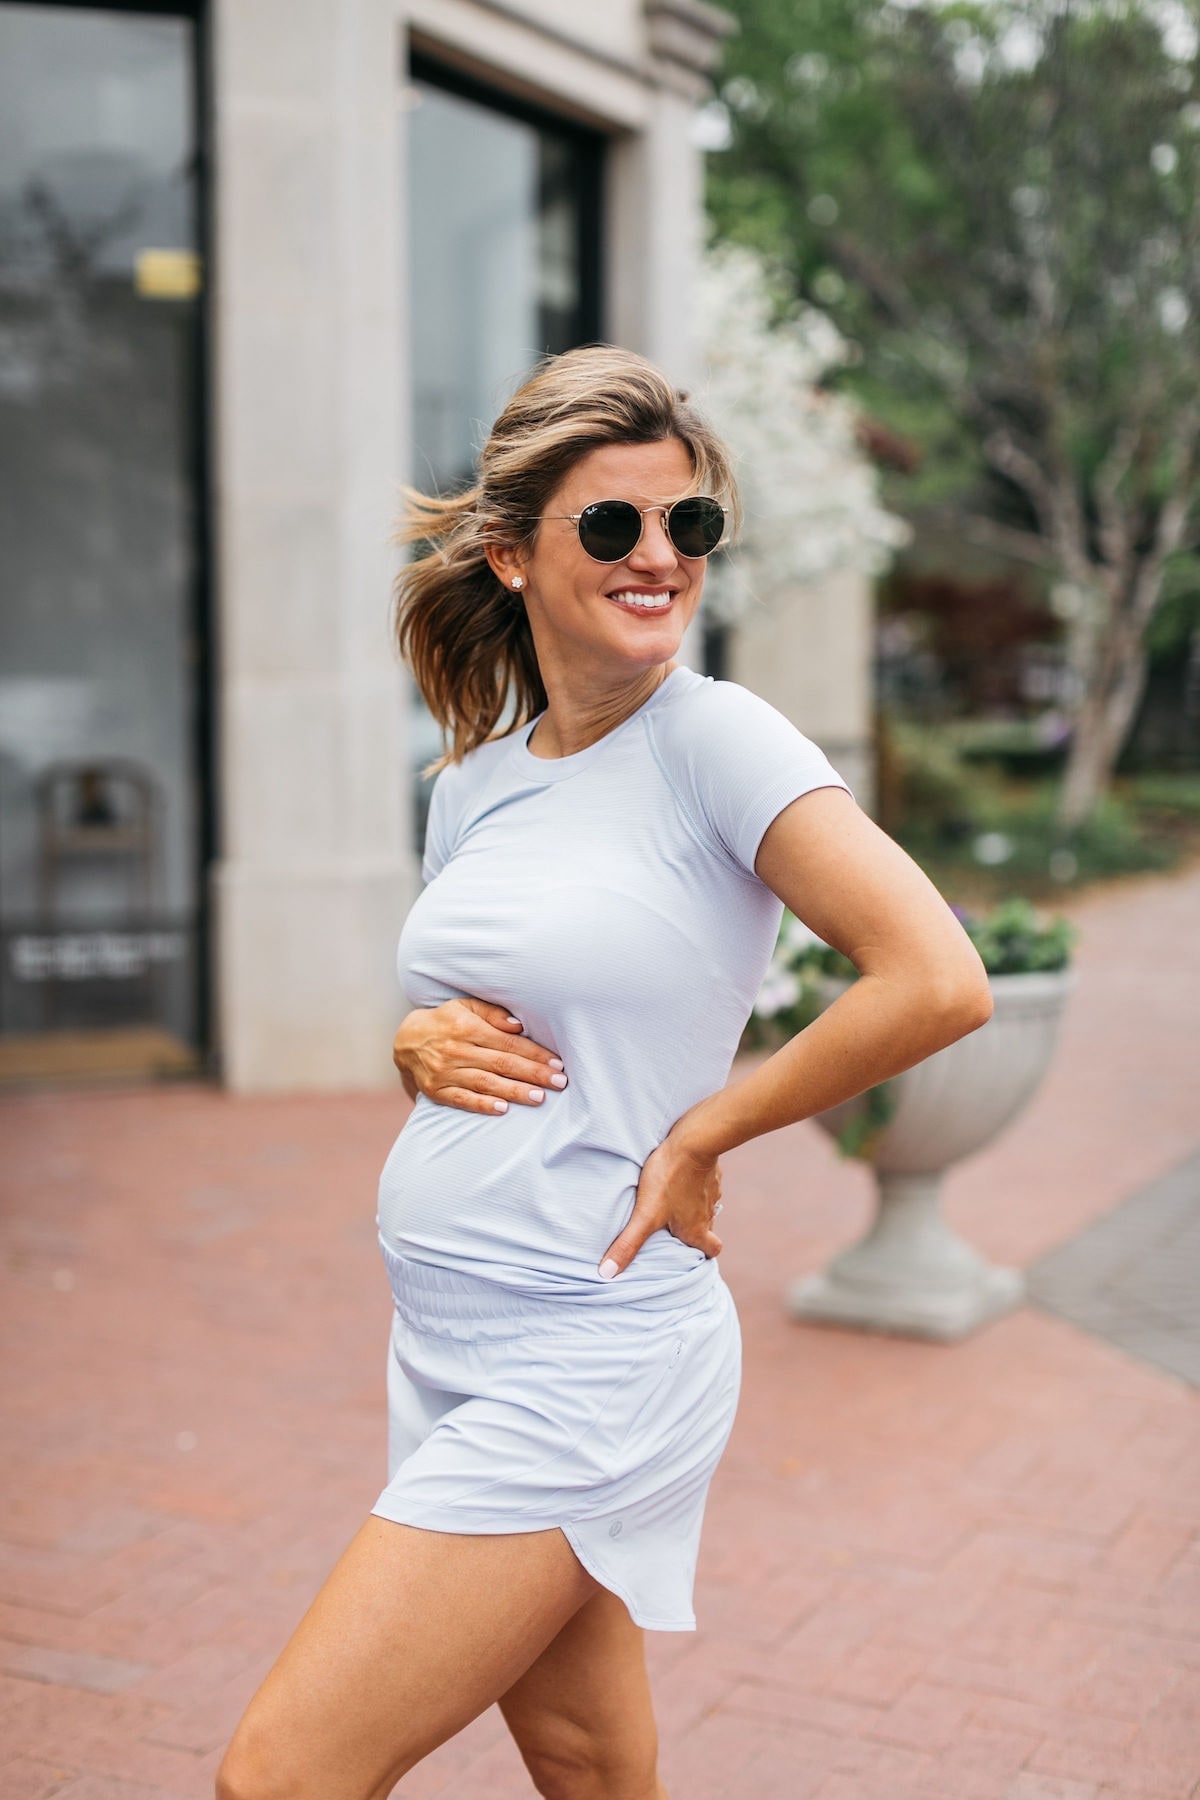 Stylish Lululemon Outfits for a Cute Summer Look